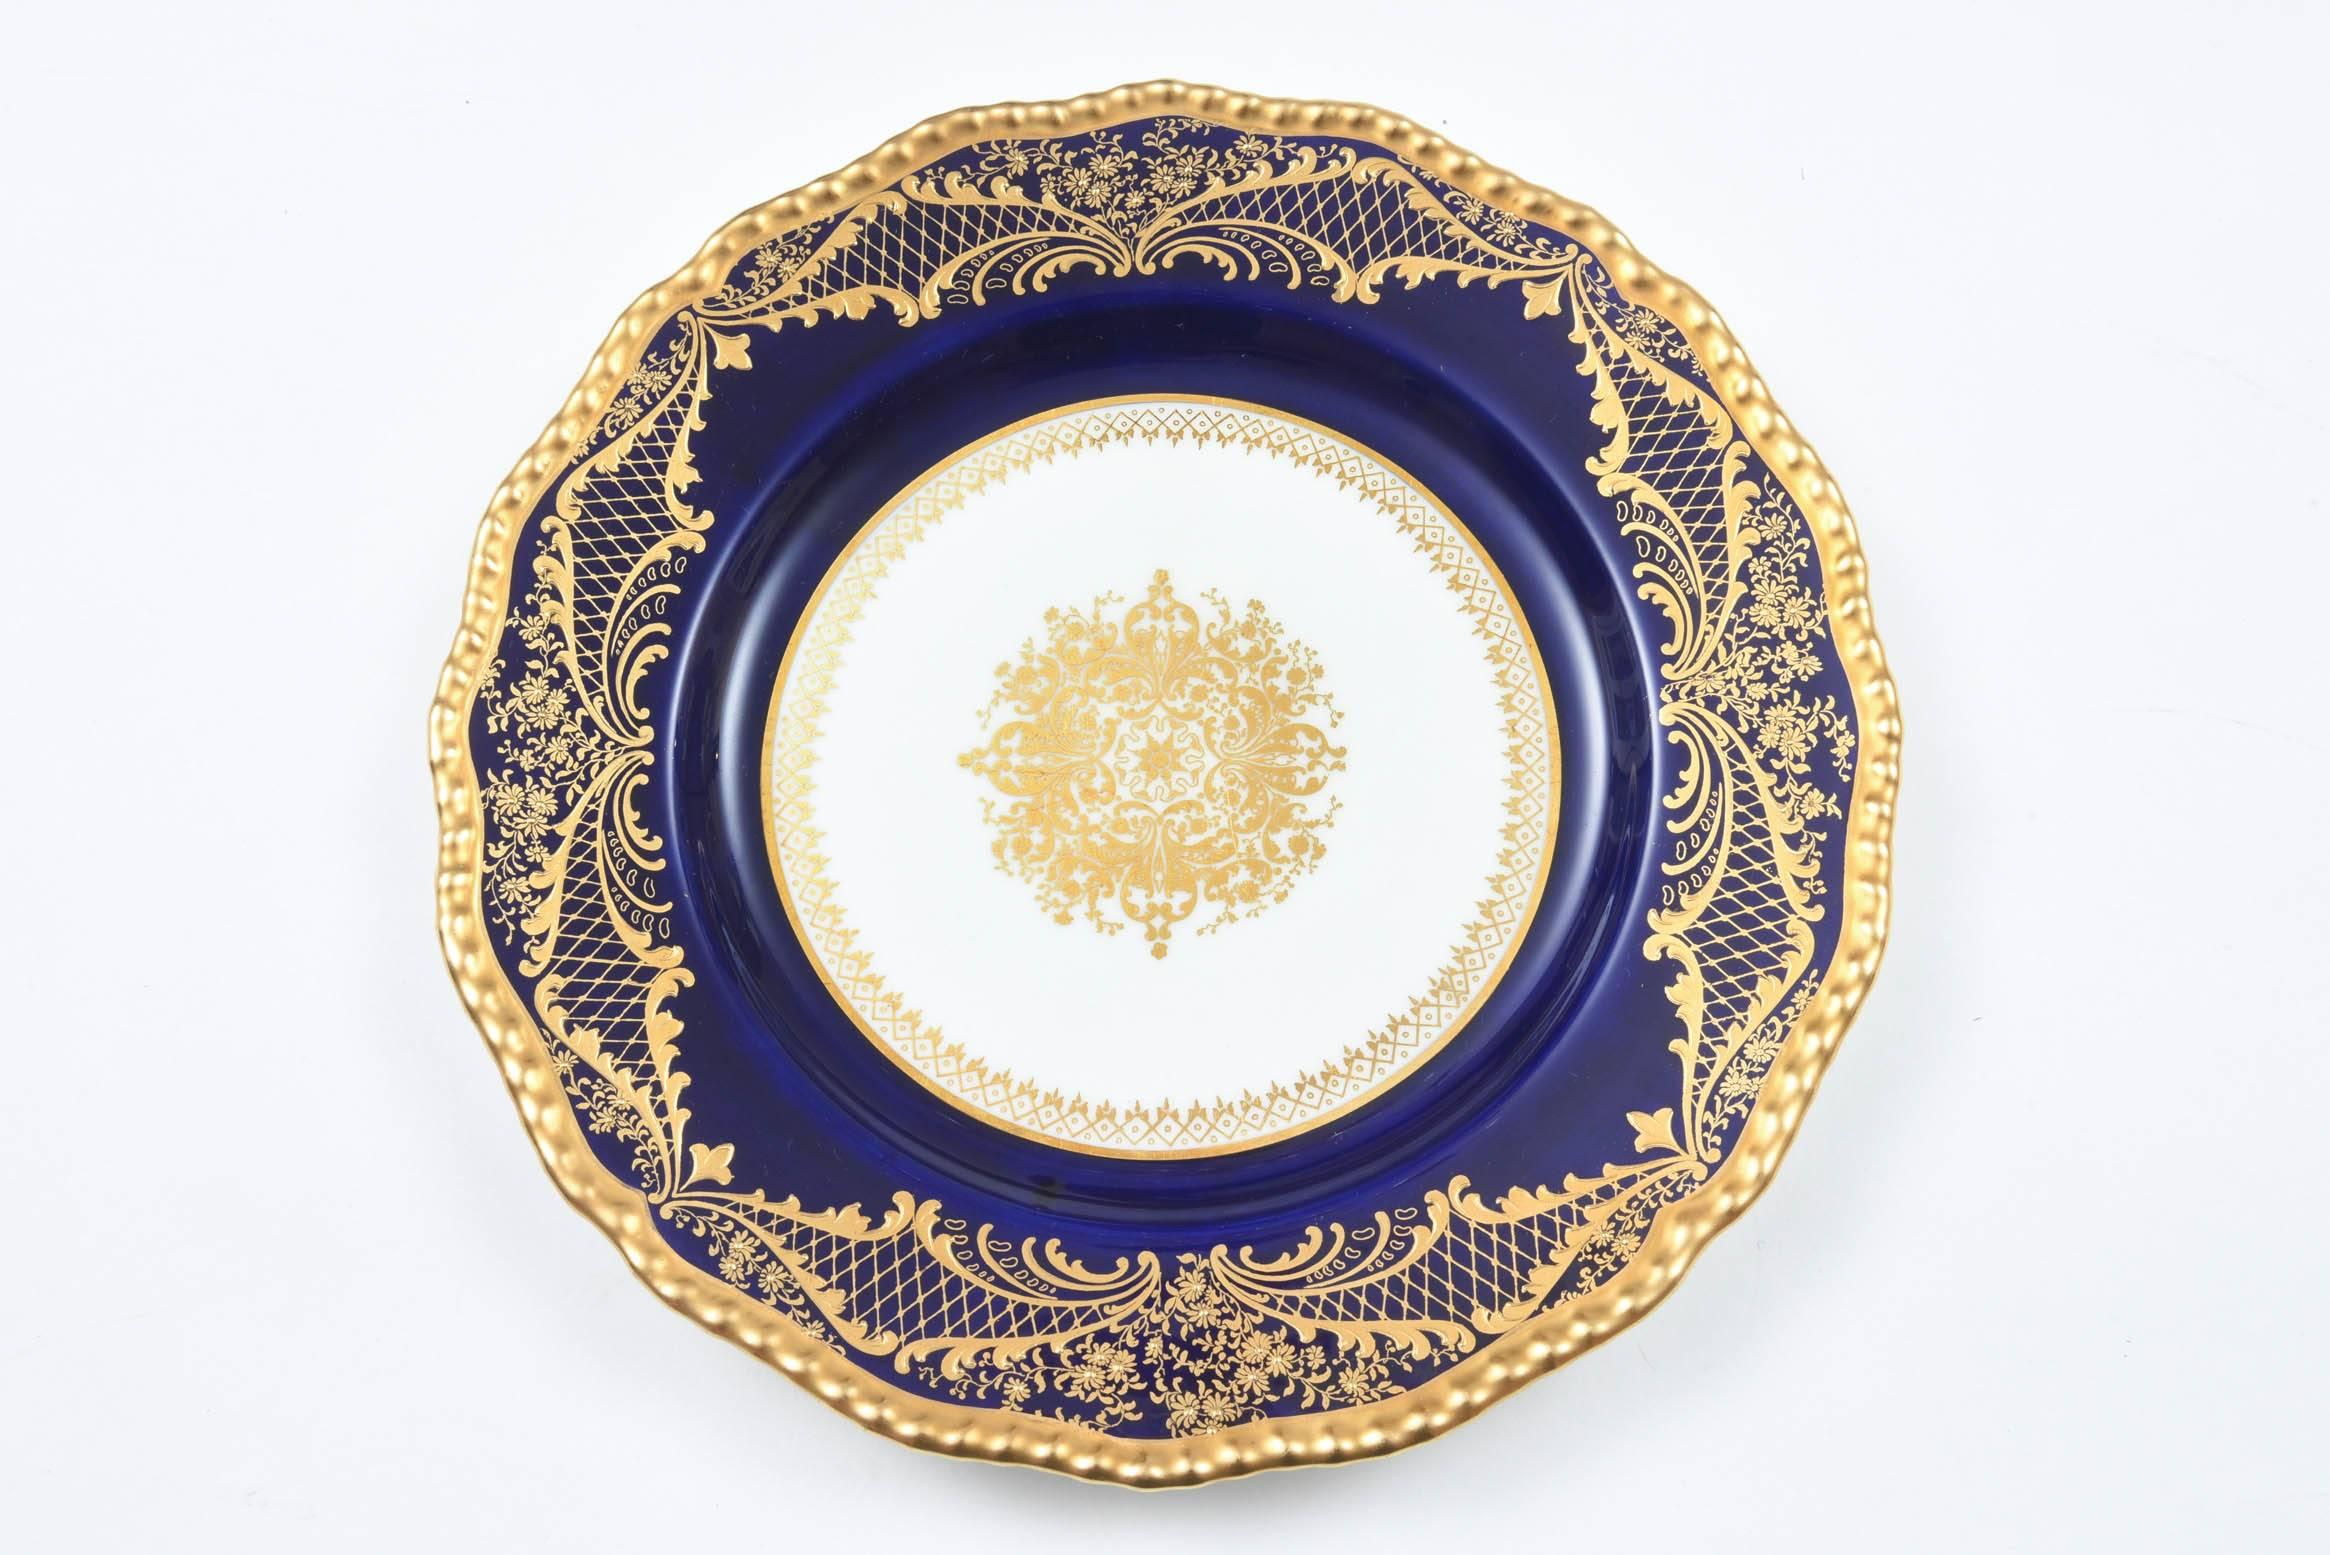 We love the shaped gadroon edge on these handsome antique Royal Doulton Plates. A great center gilt medallion and nice raised tooled gold on their cobalt shoulders. Custom Fifth Ave New York Retailer who was re known for tabletop in the early part